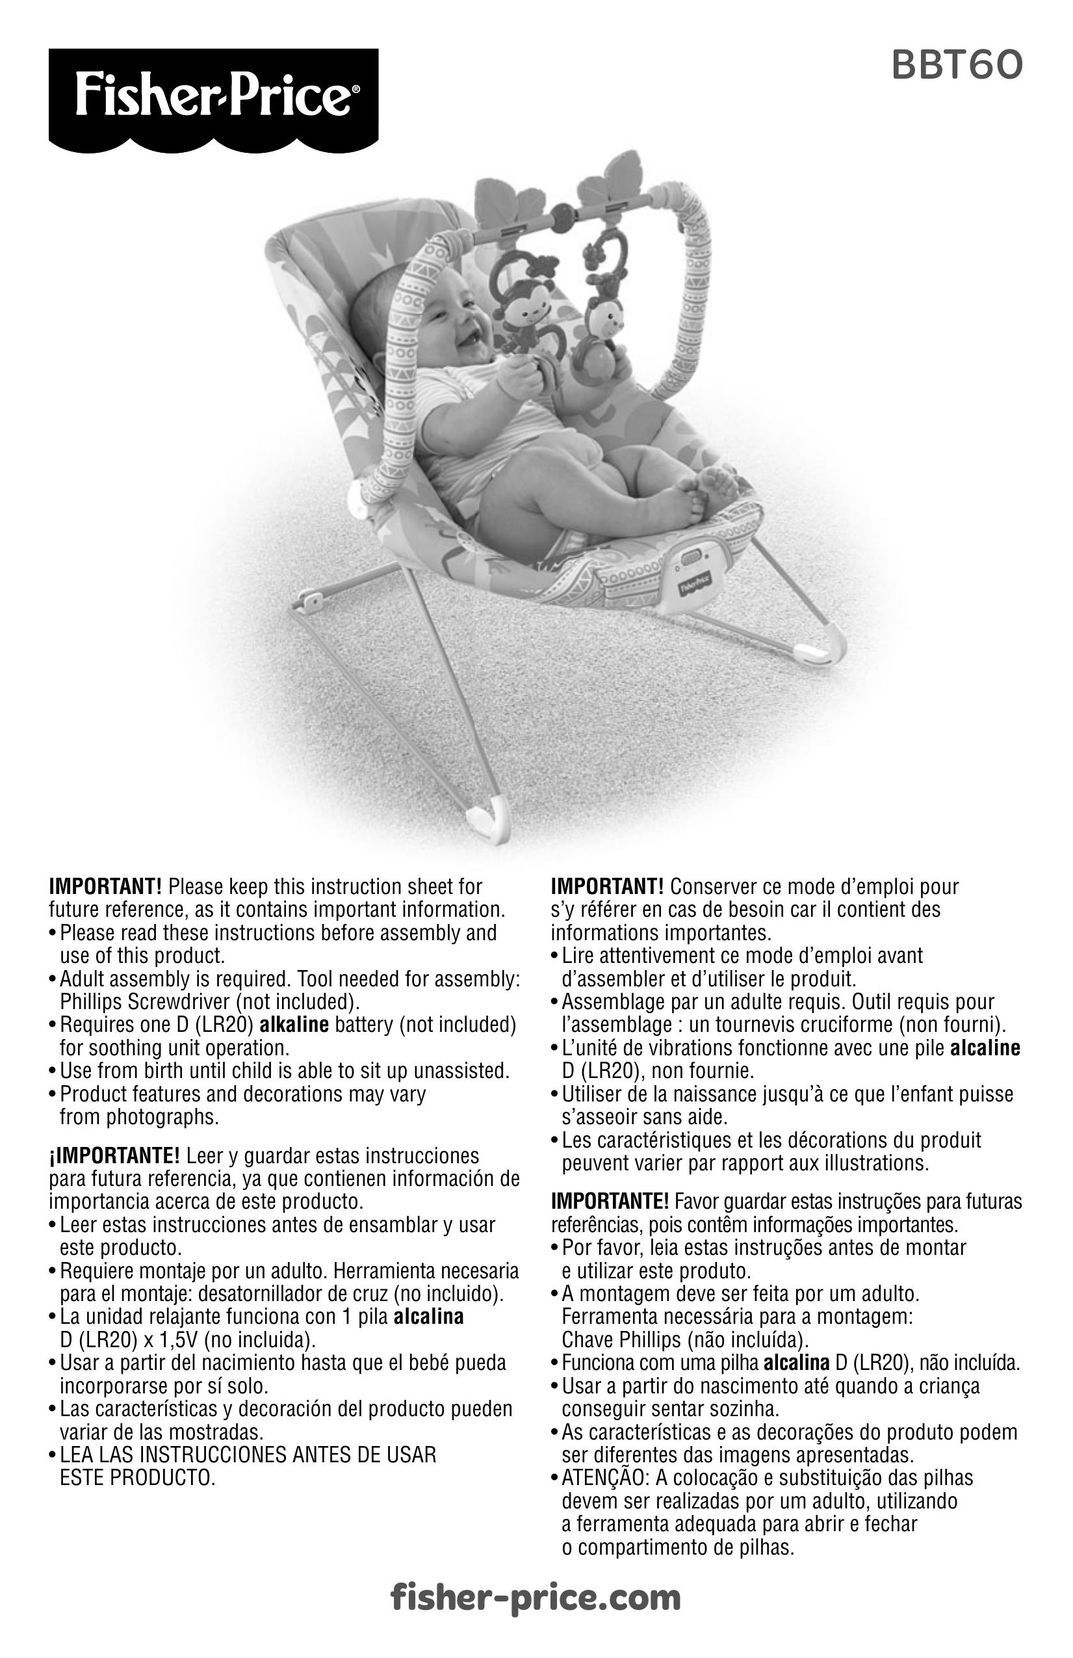 Fisher-Price BBT60 Doll User Manual